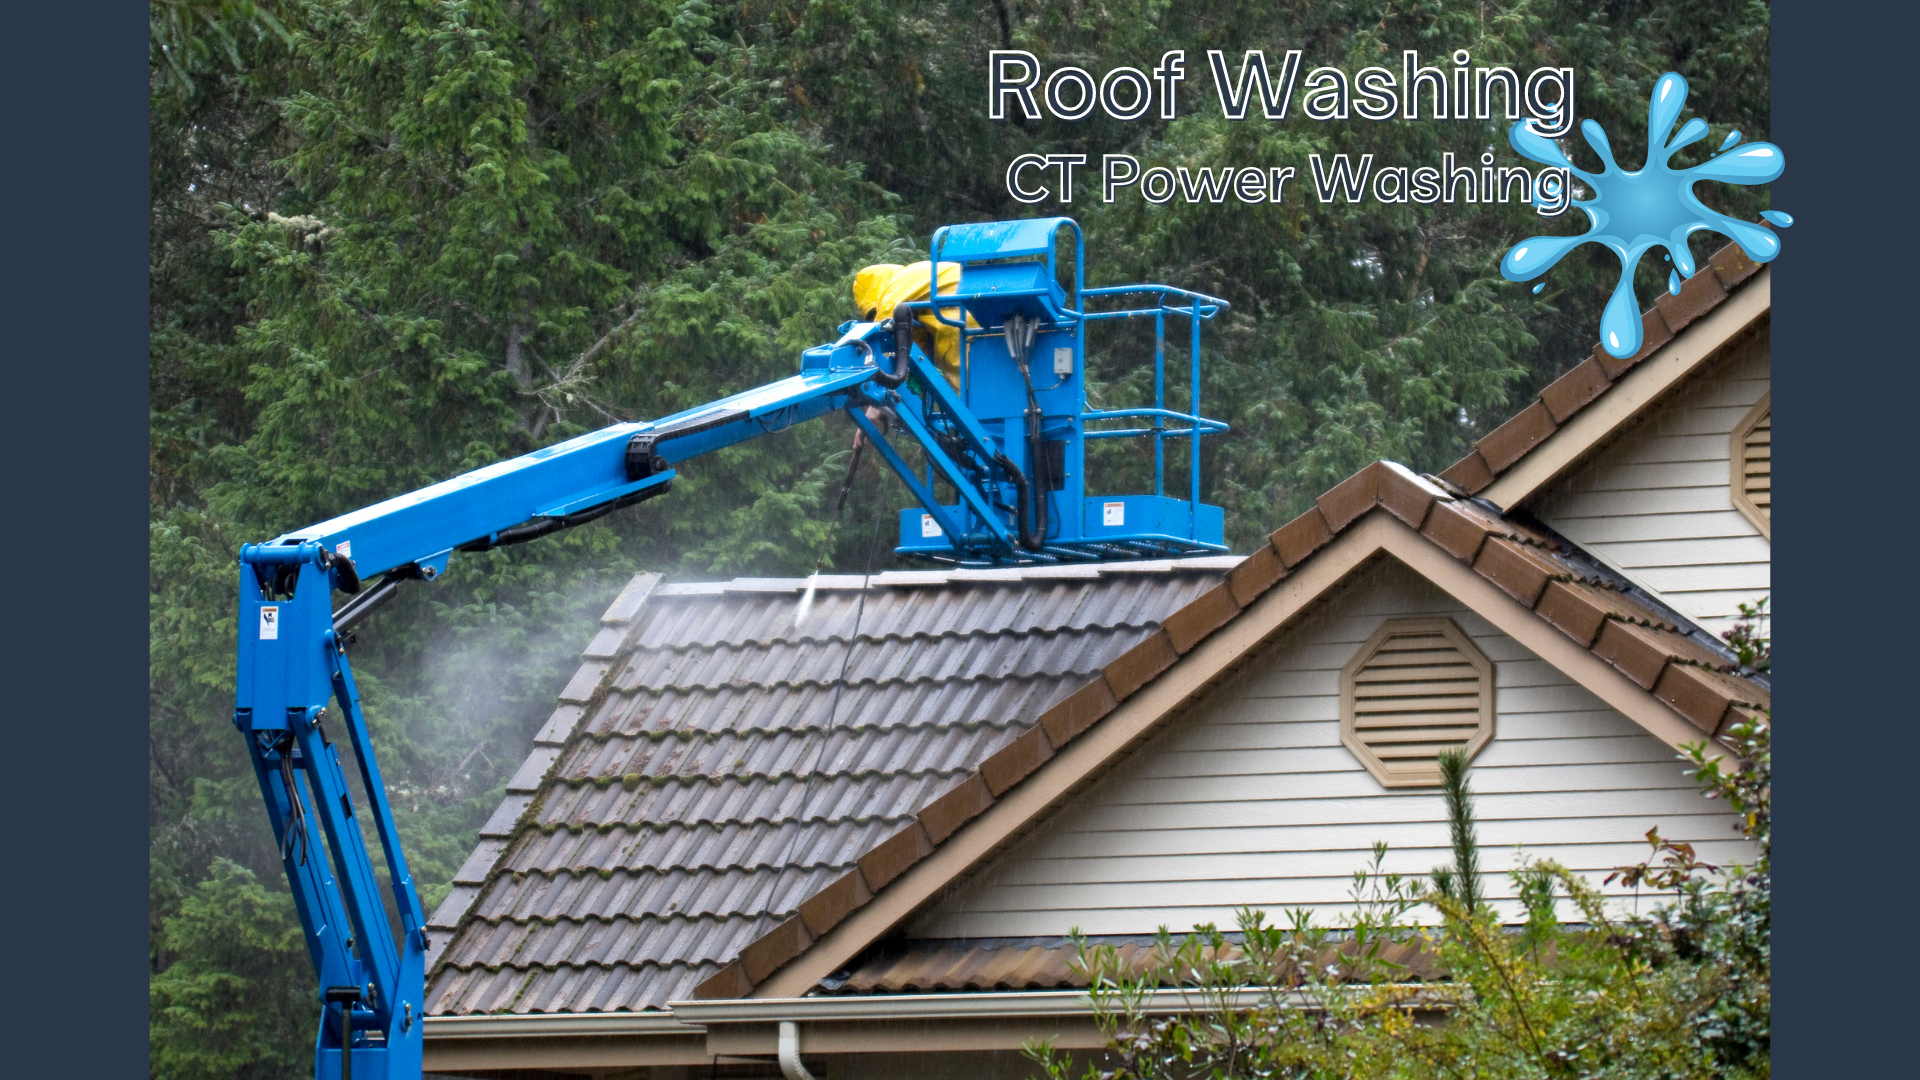 Roof Cleaning Service Connecticut